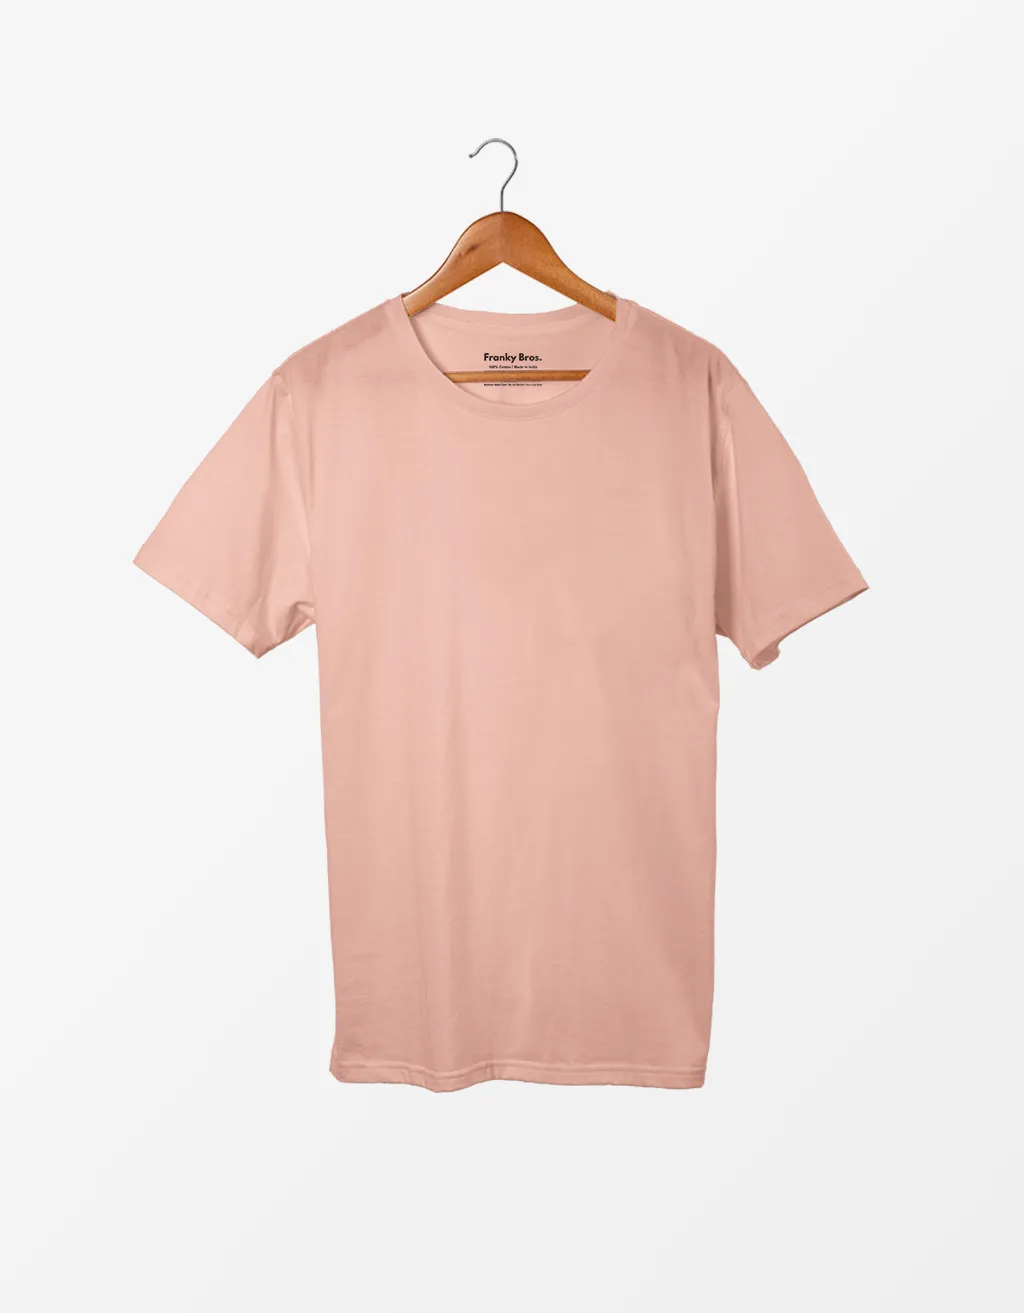 peach color t shirt for men and women buy online india